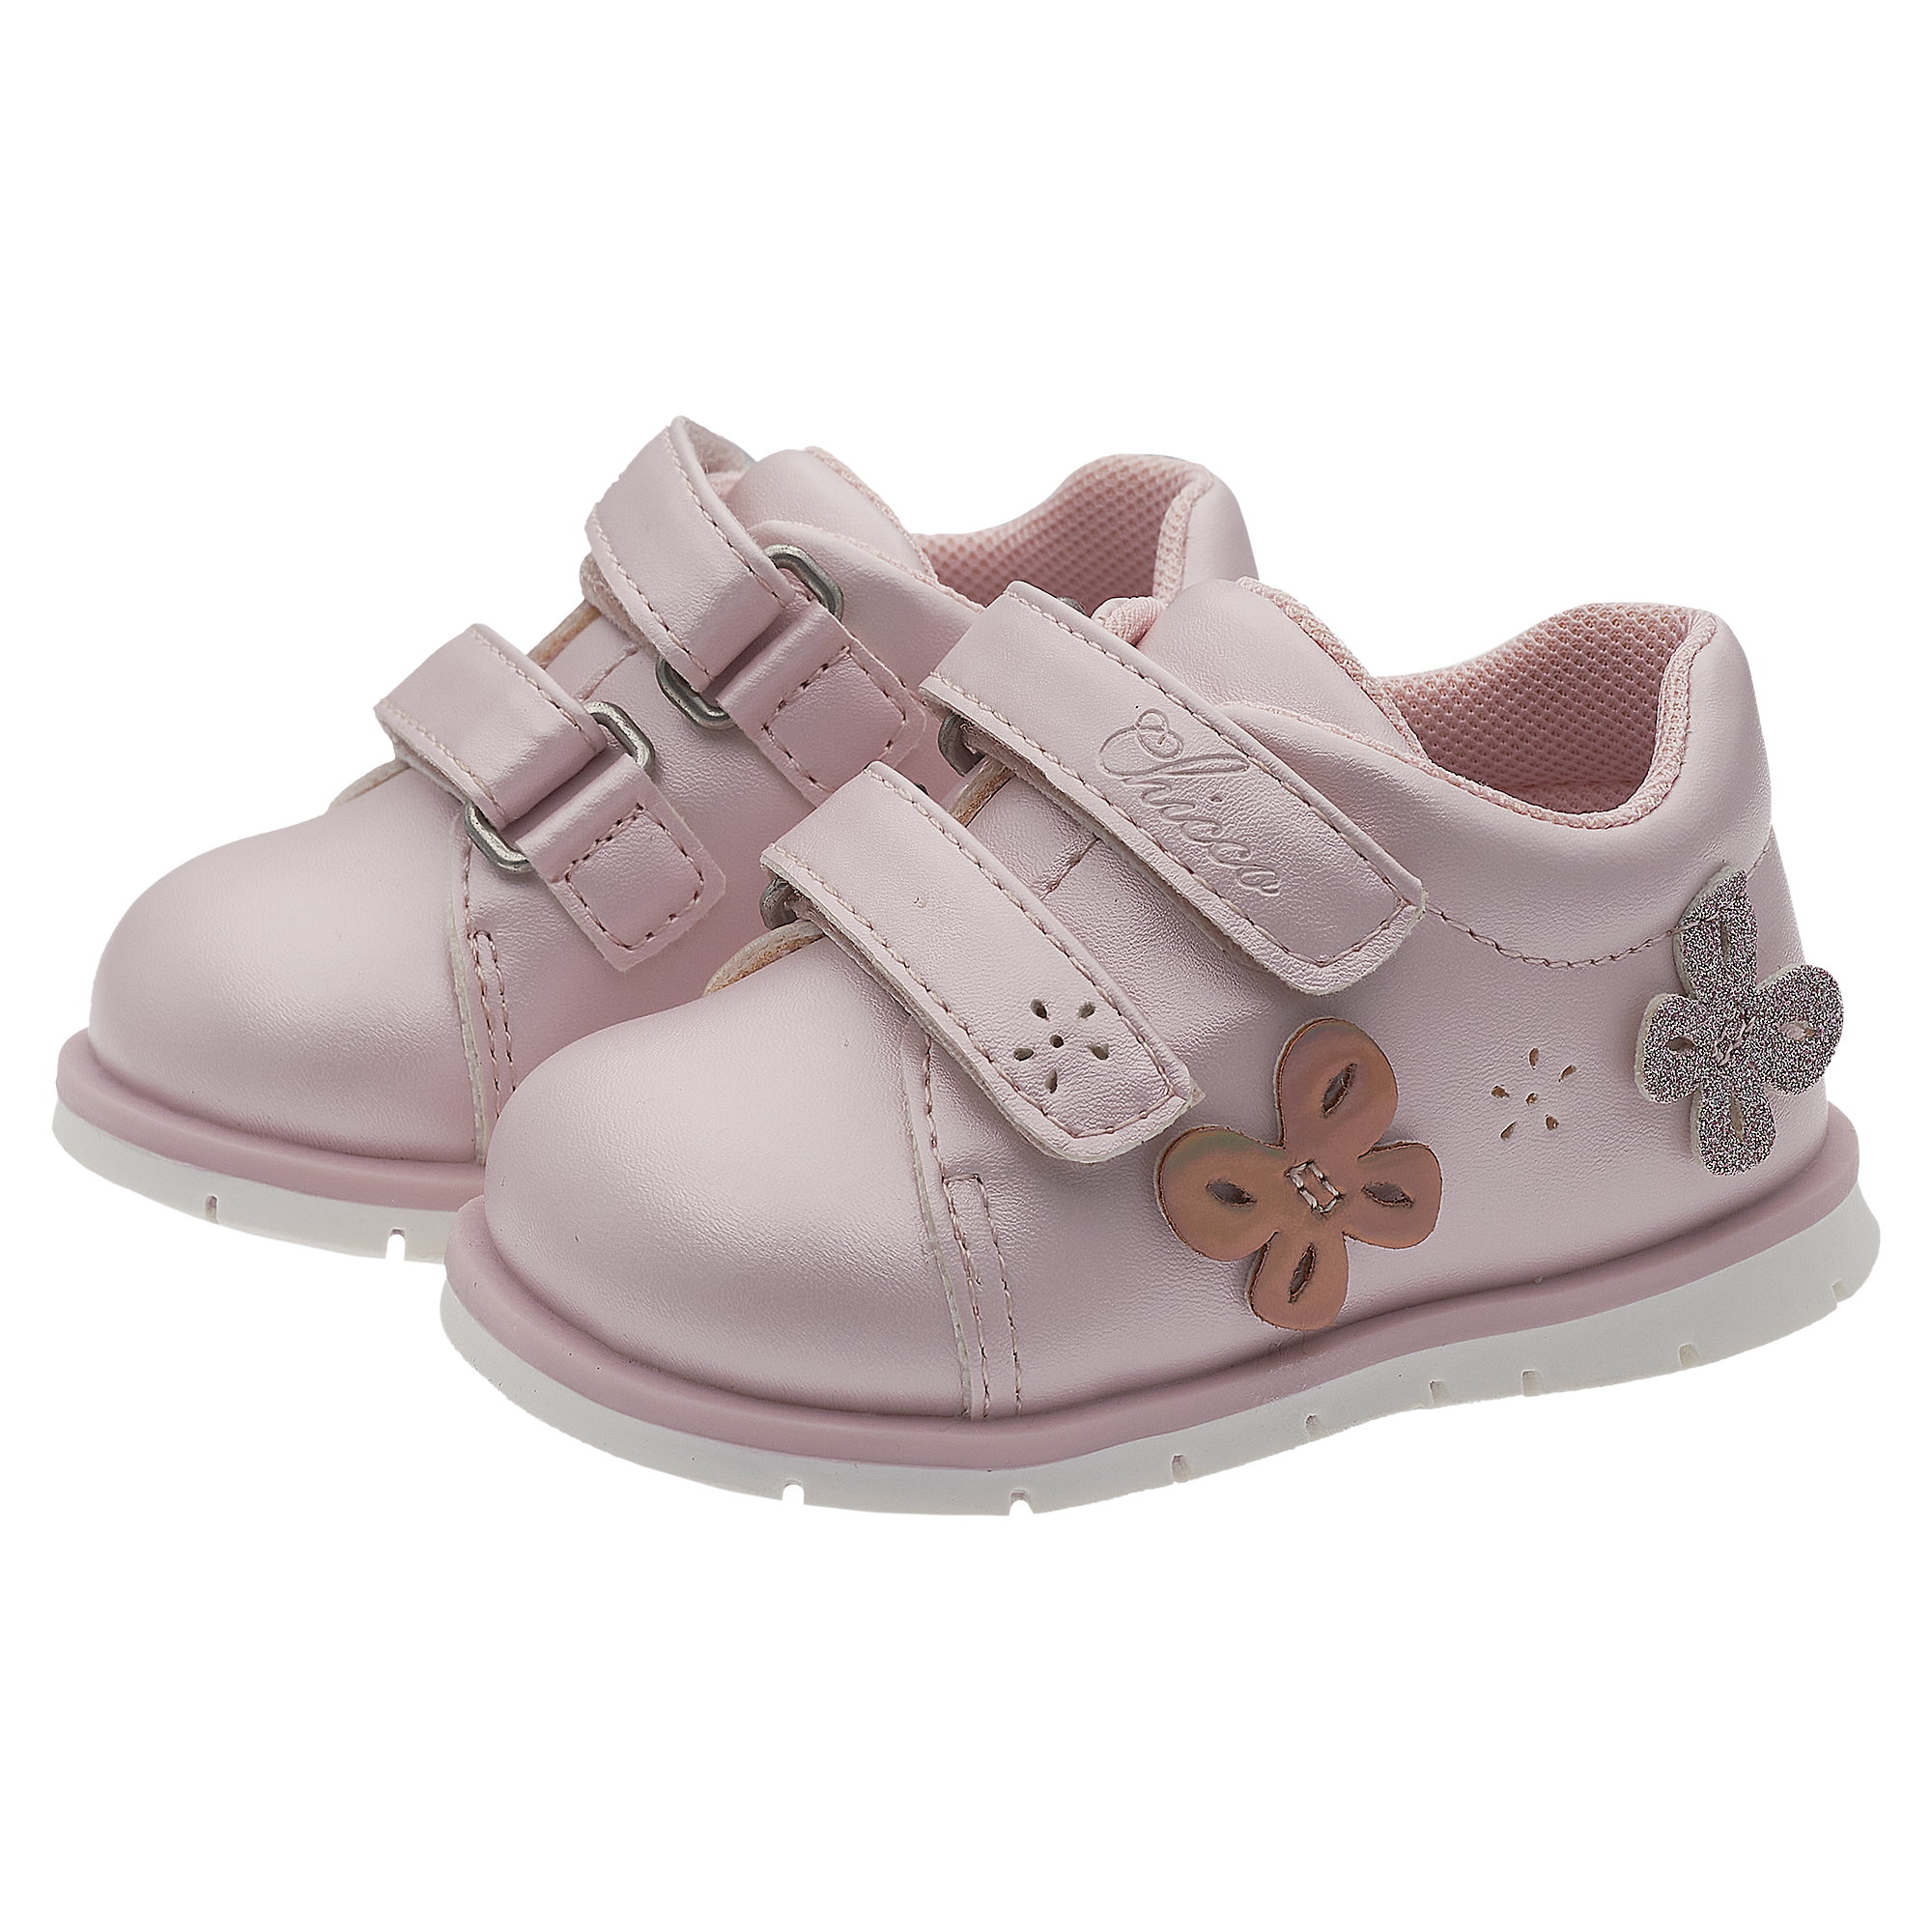 Chicco sneaker flannery - Chicco